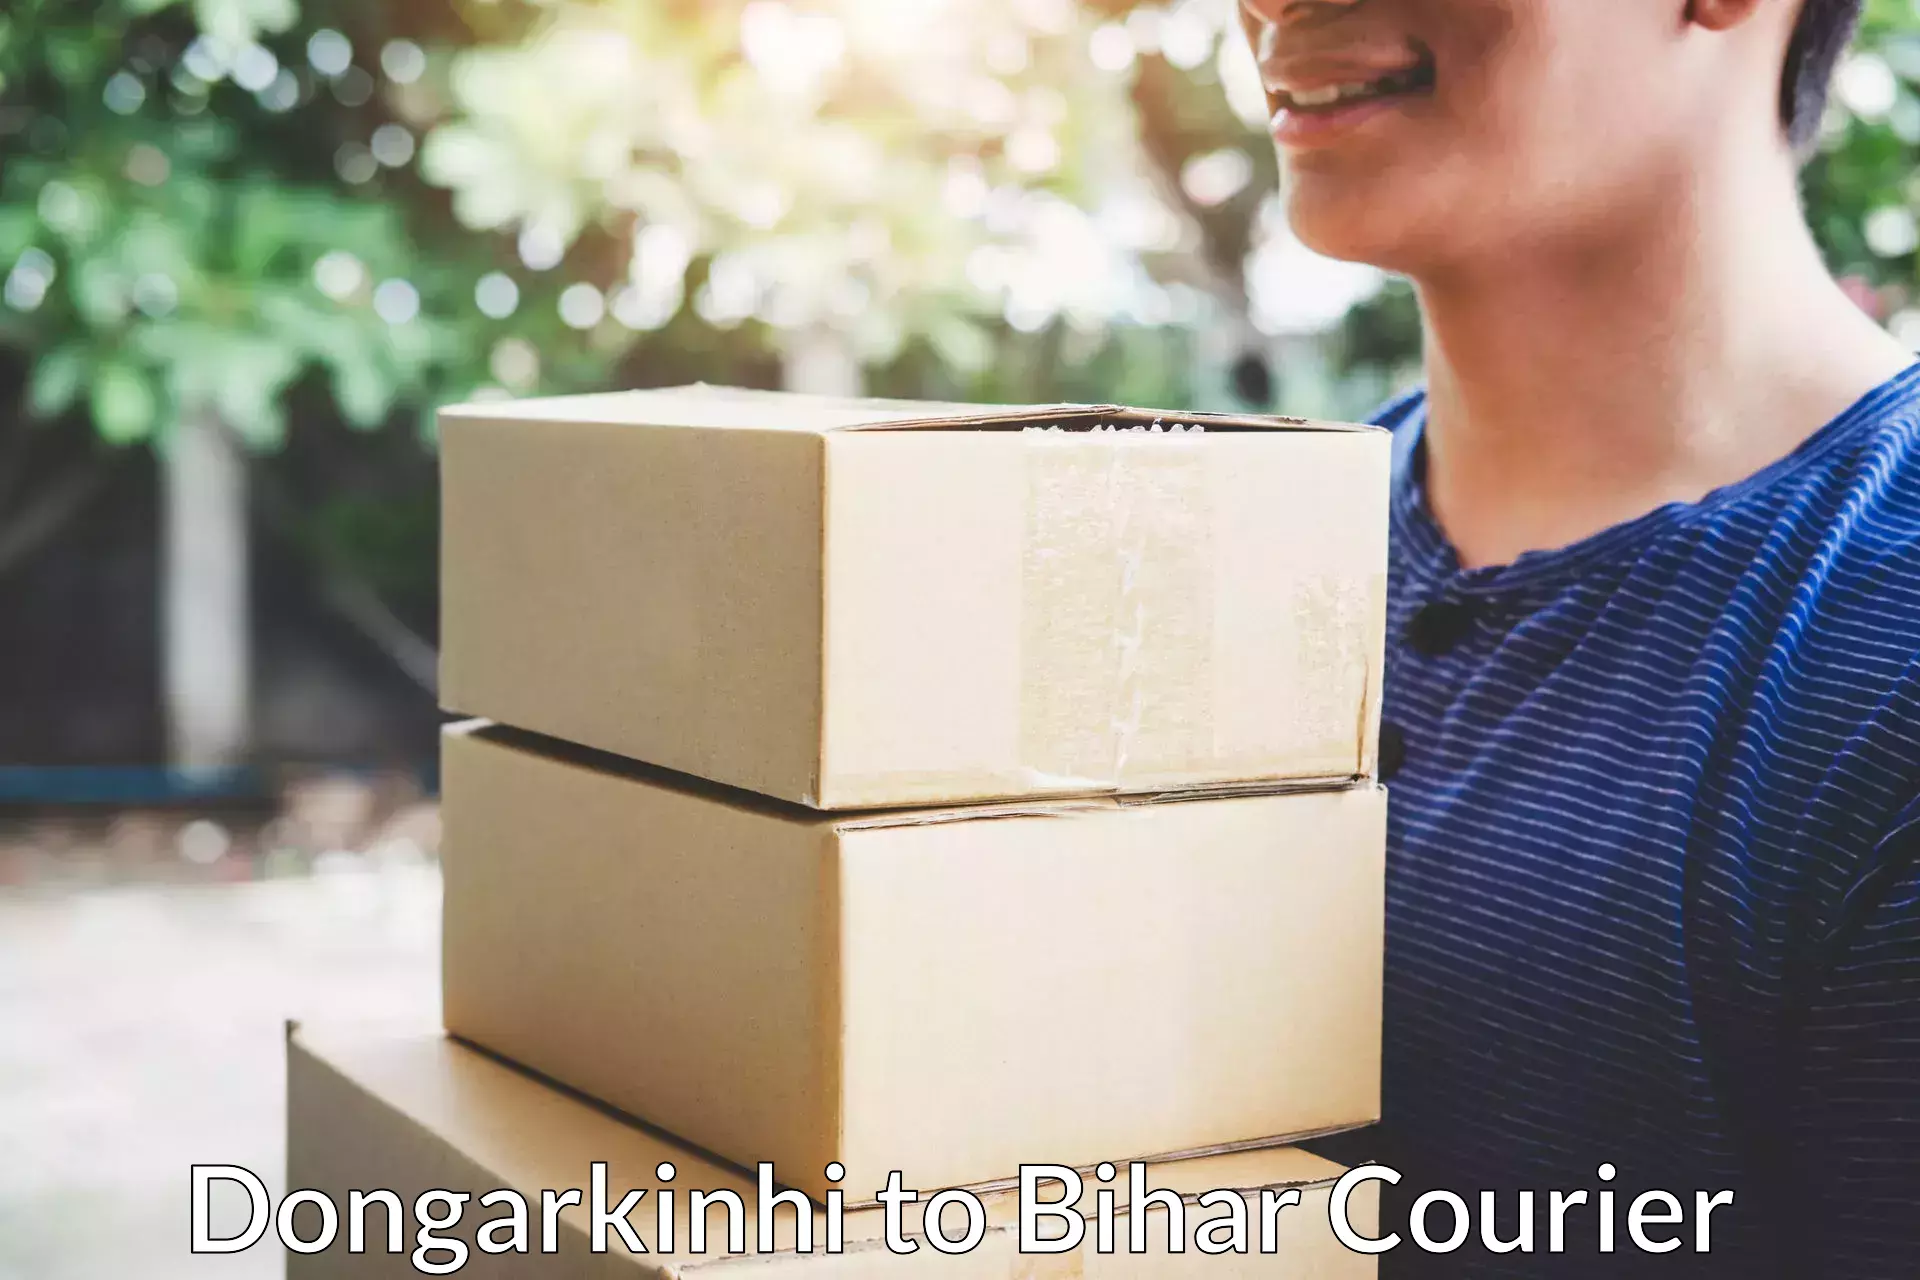 Professional moving assistance Dongarkinhi to Bhorey